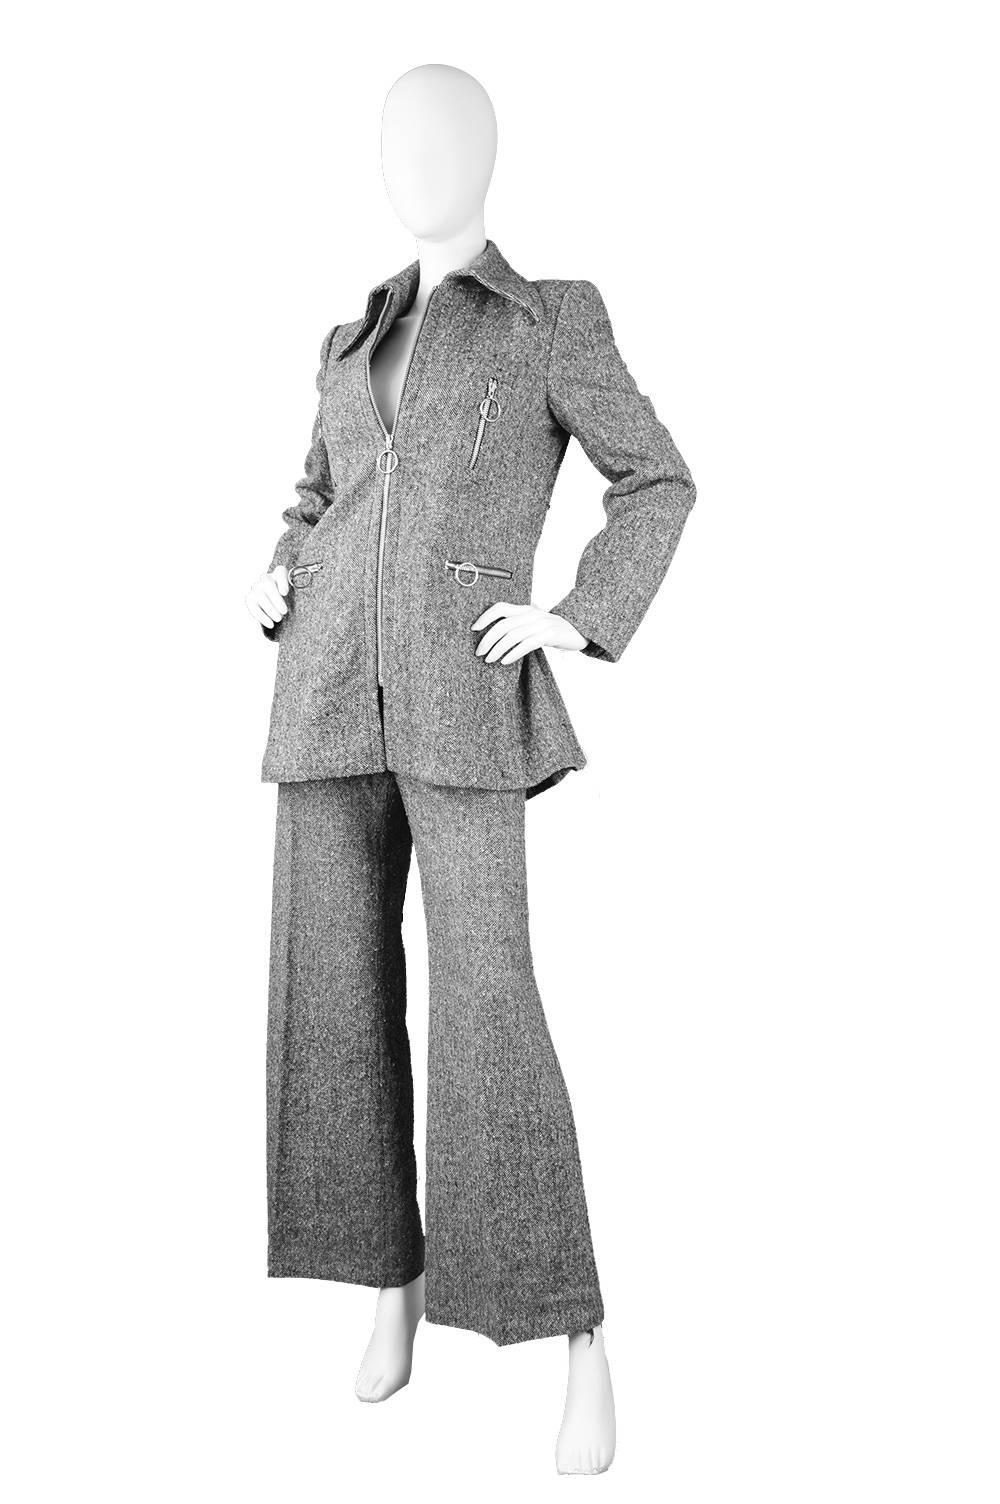 An incredible, rare vintage womens flared pant/ trouser suit from the 1970s by luxury French designer, Ted Lapidus. Considered a pioneer of unisex fashion and the safari suit, this is an excellent example of Lapidus' work. In a grey wool tweed with